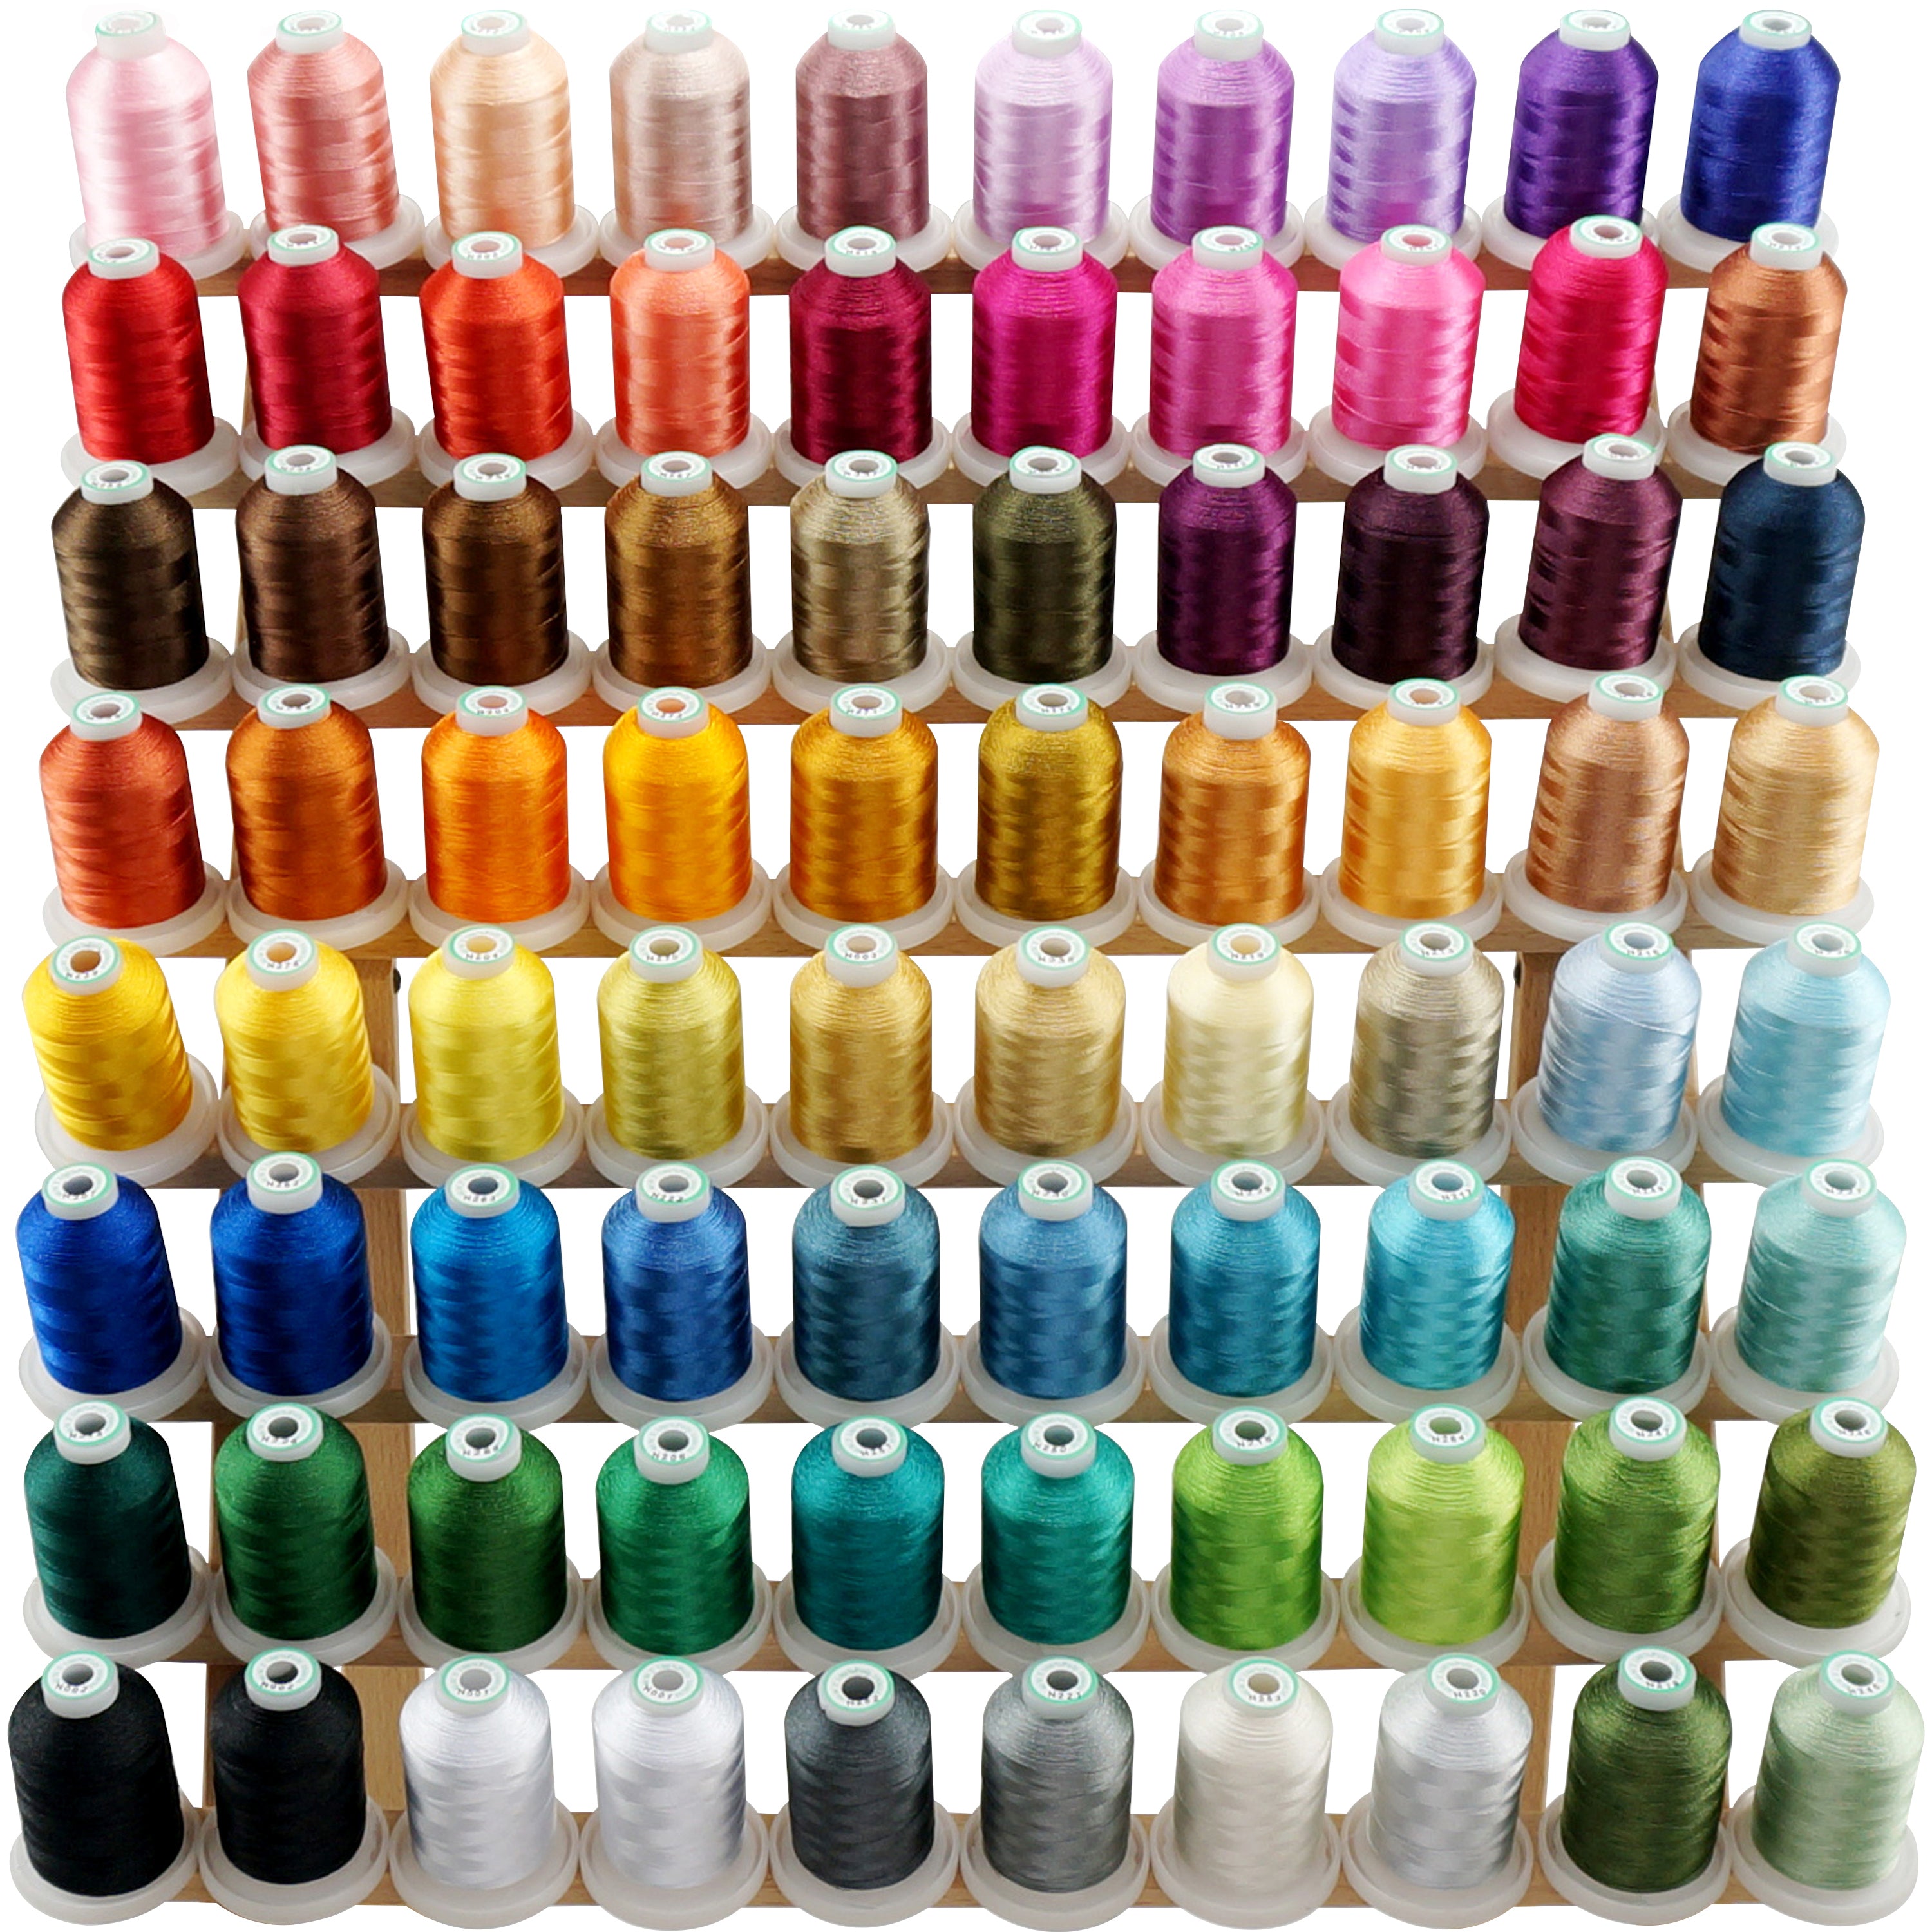  New brothread Polyester Embroidery Machine Thread 1000m Each  with Clear Plastic Storage Box for Embroidery & Quilting - 4xSnow  White+4xBlack